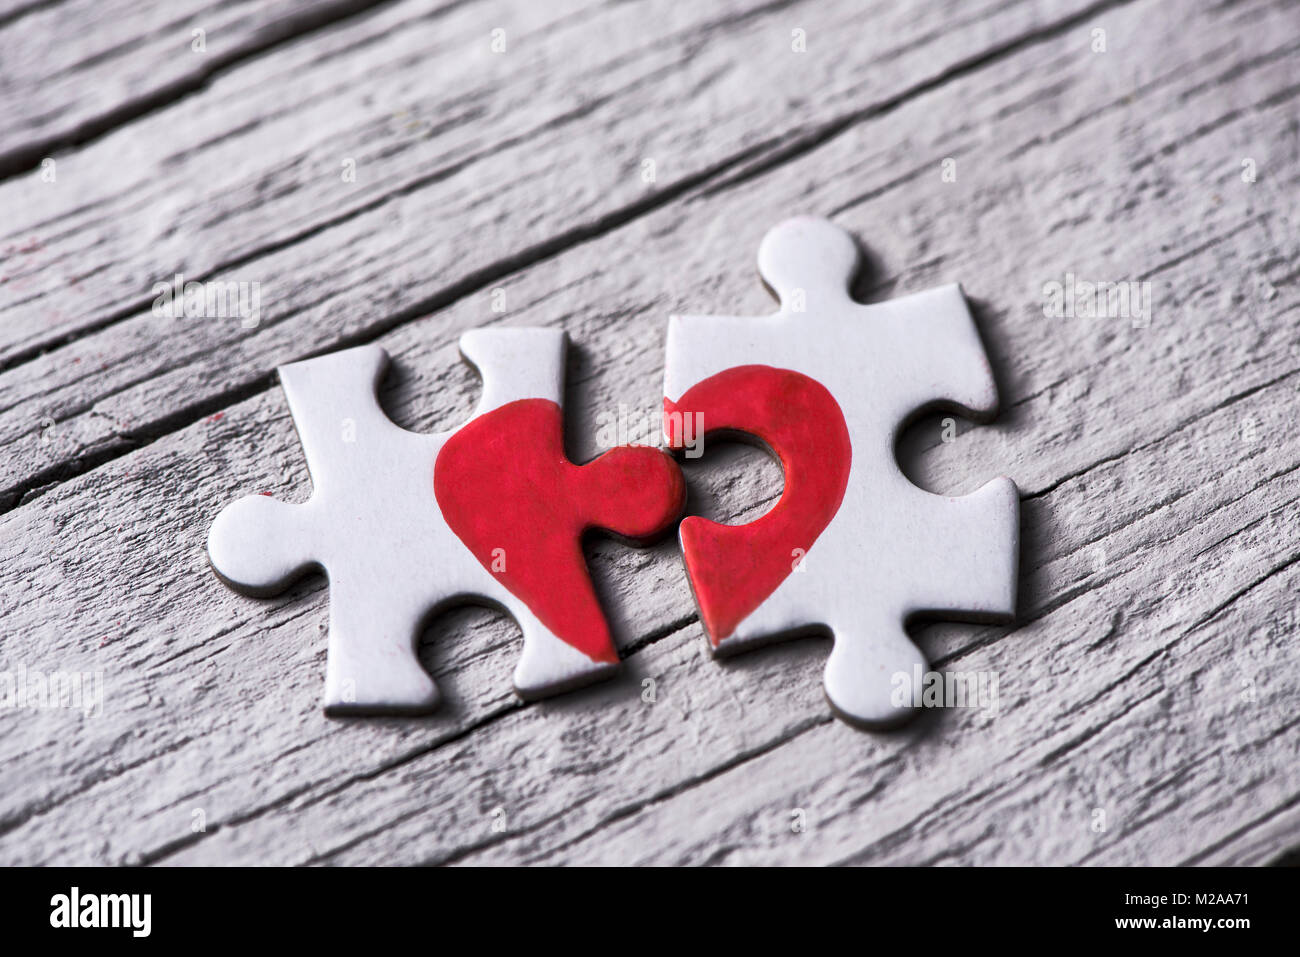 closeup of two separated pieces of a puzzle which together form a heart on a white rustic wooden surface, depicting the idea of rupture or cooperation Stock Photo